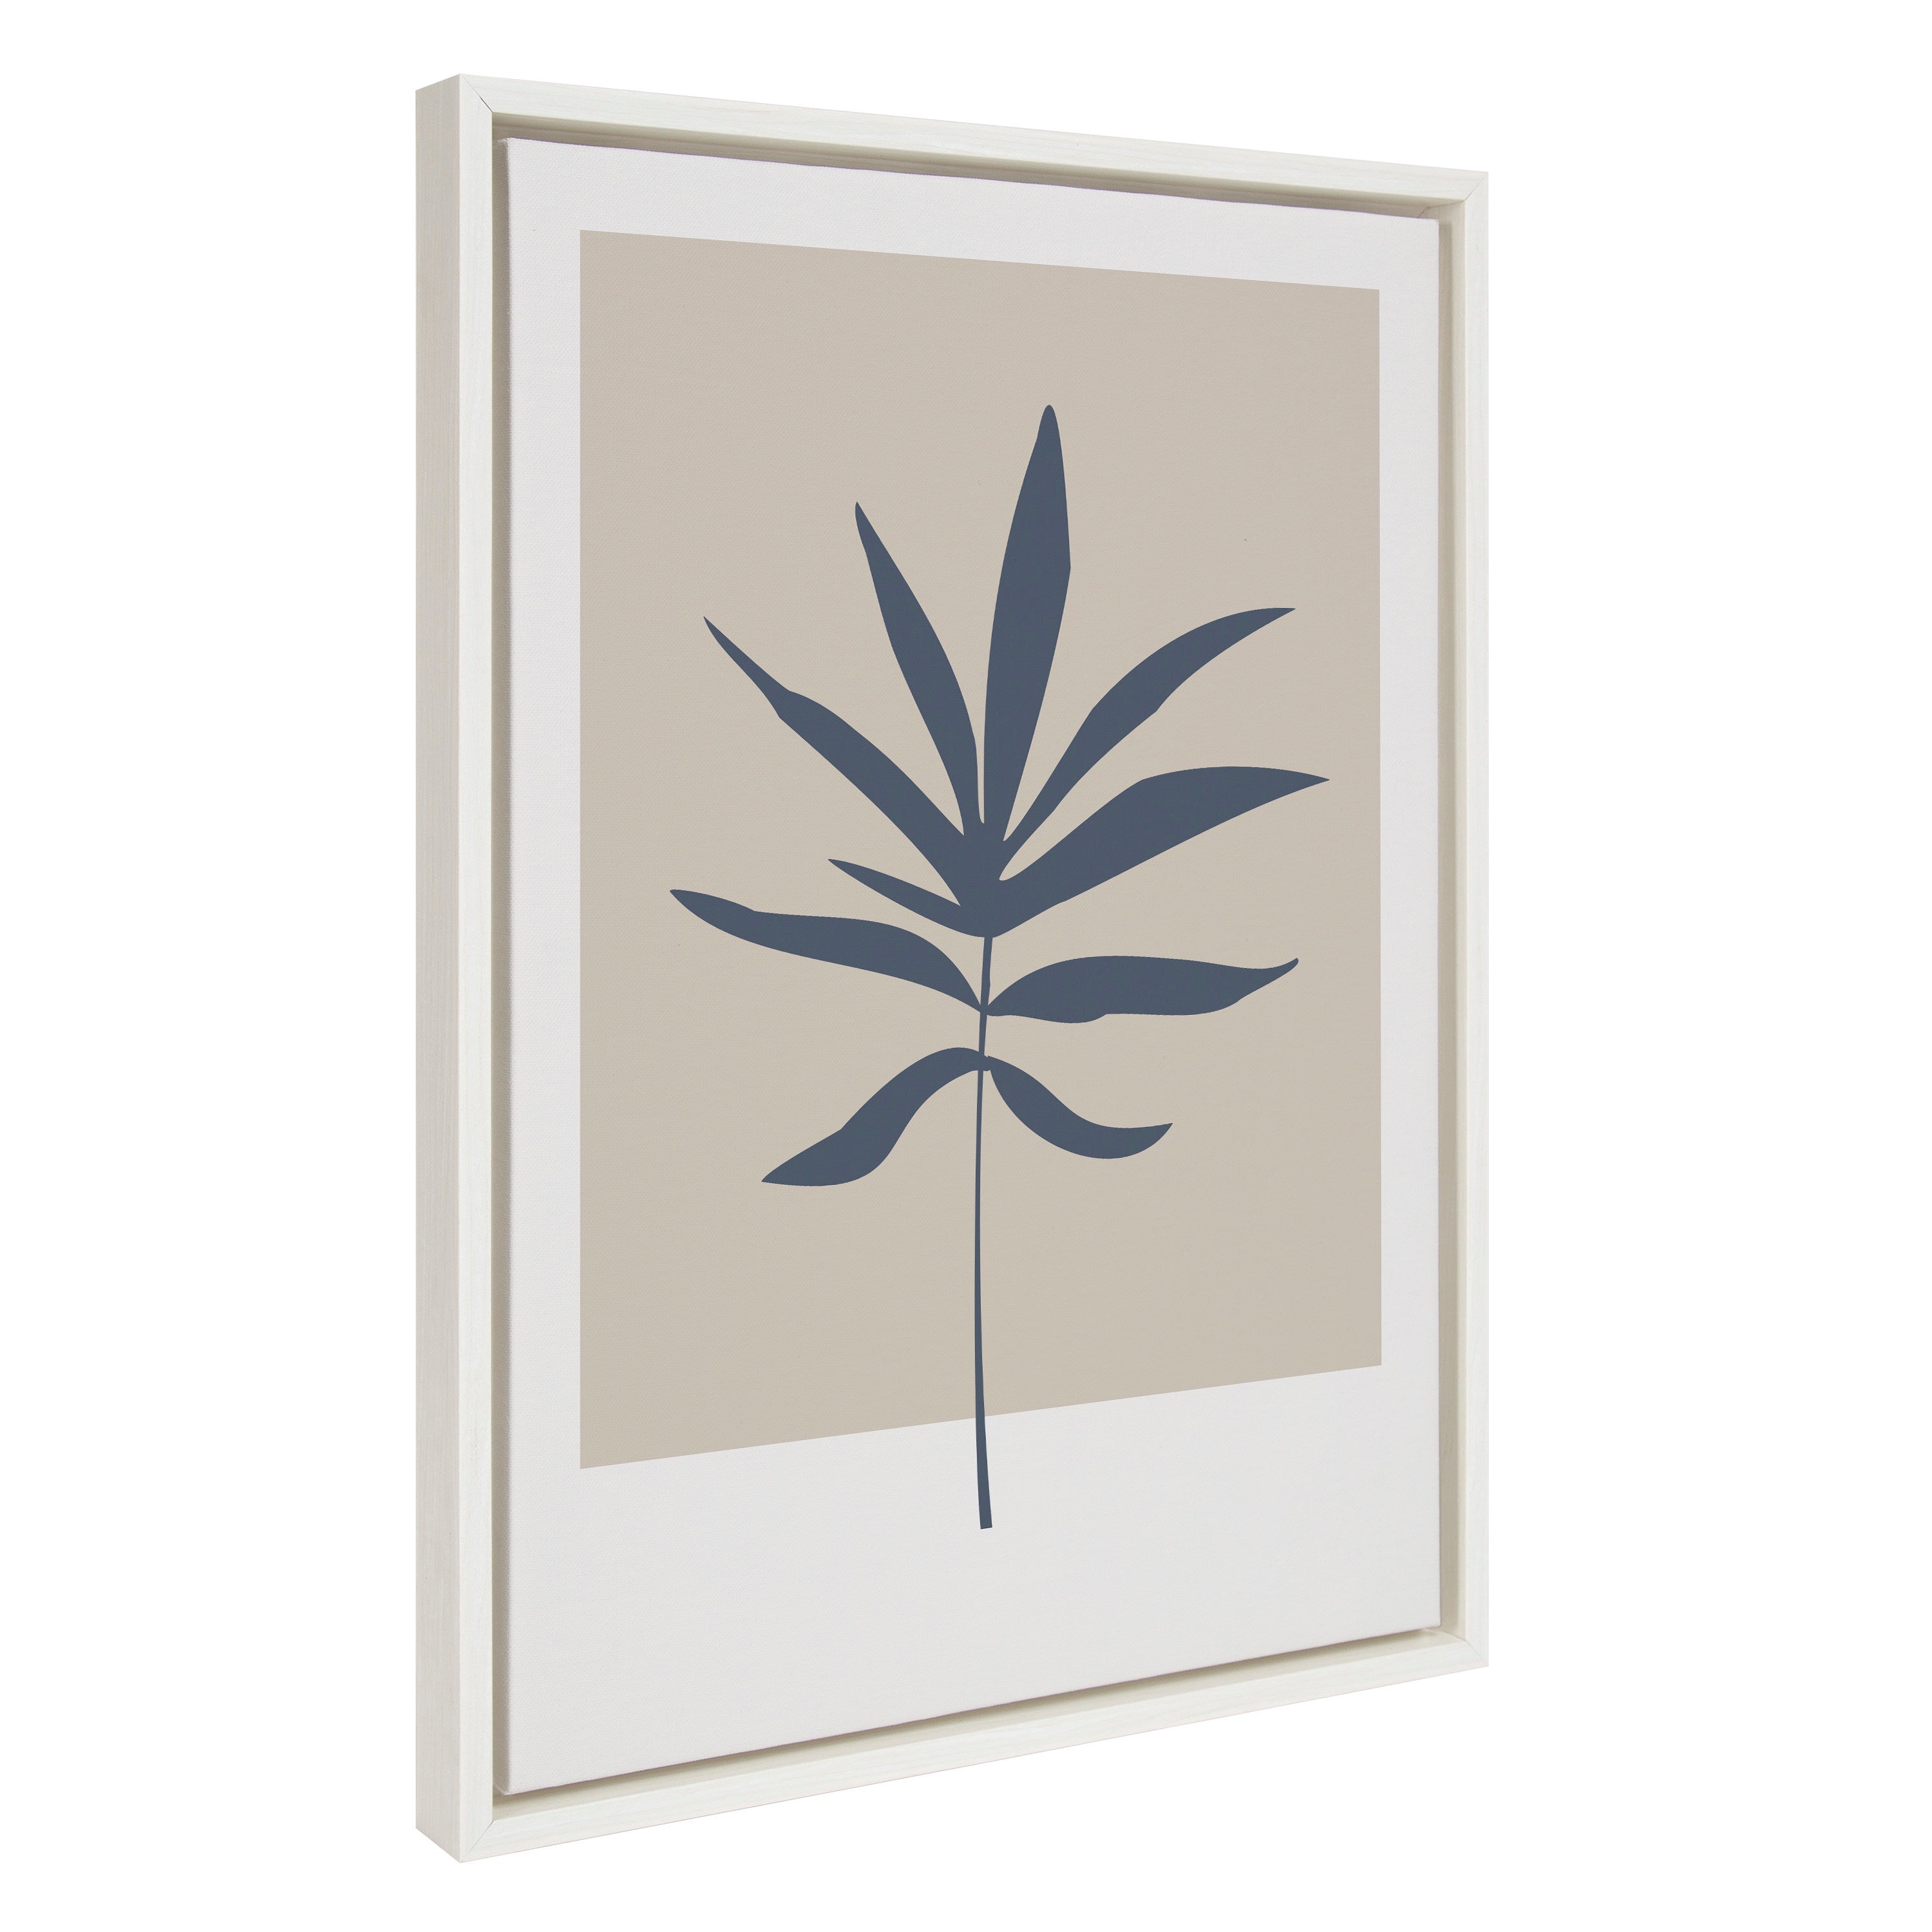 Sylvie Muted Tan and Blue Colorblock Botanical Leaf Framed Canvas by The Creative Bunch Studio